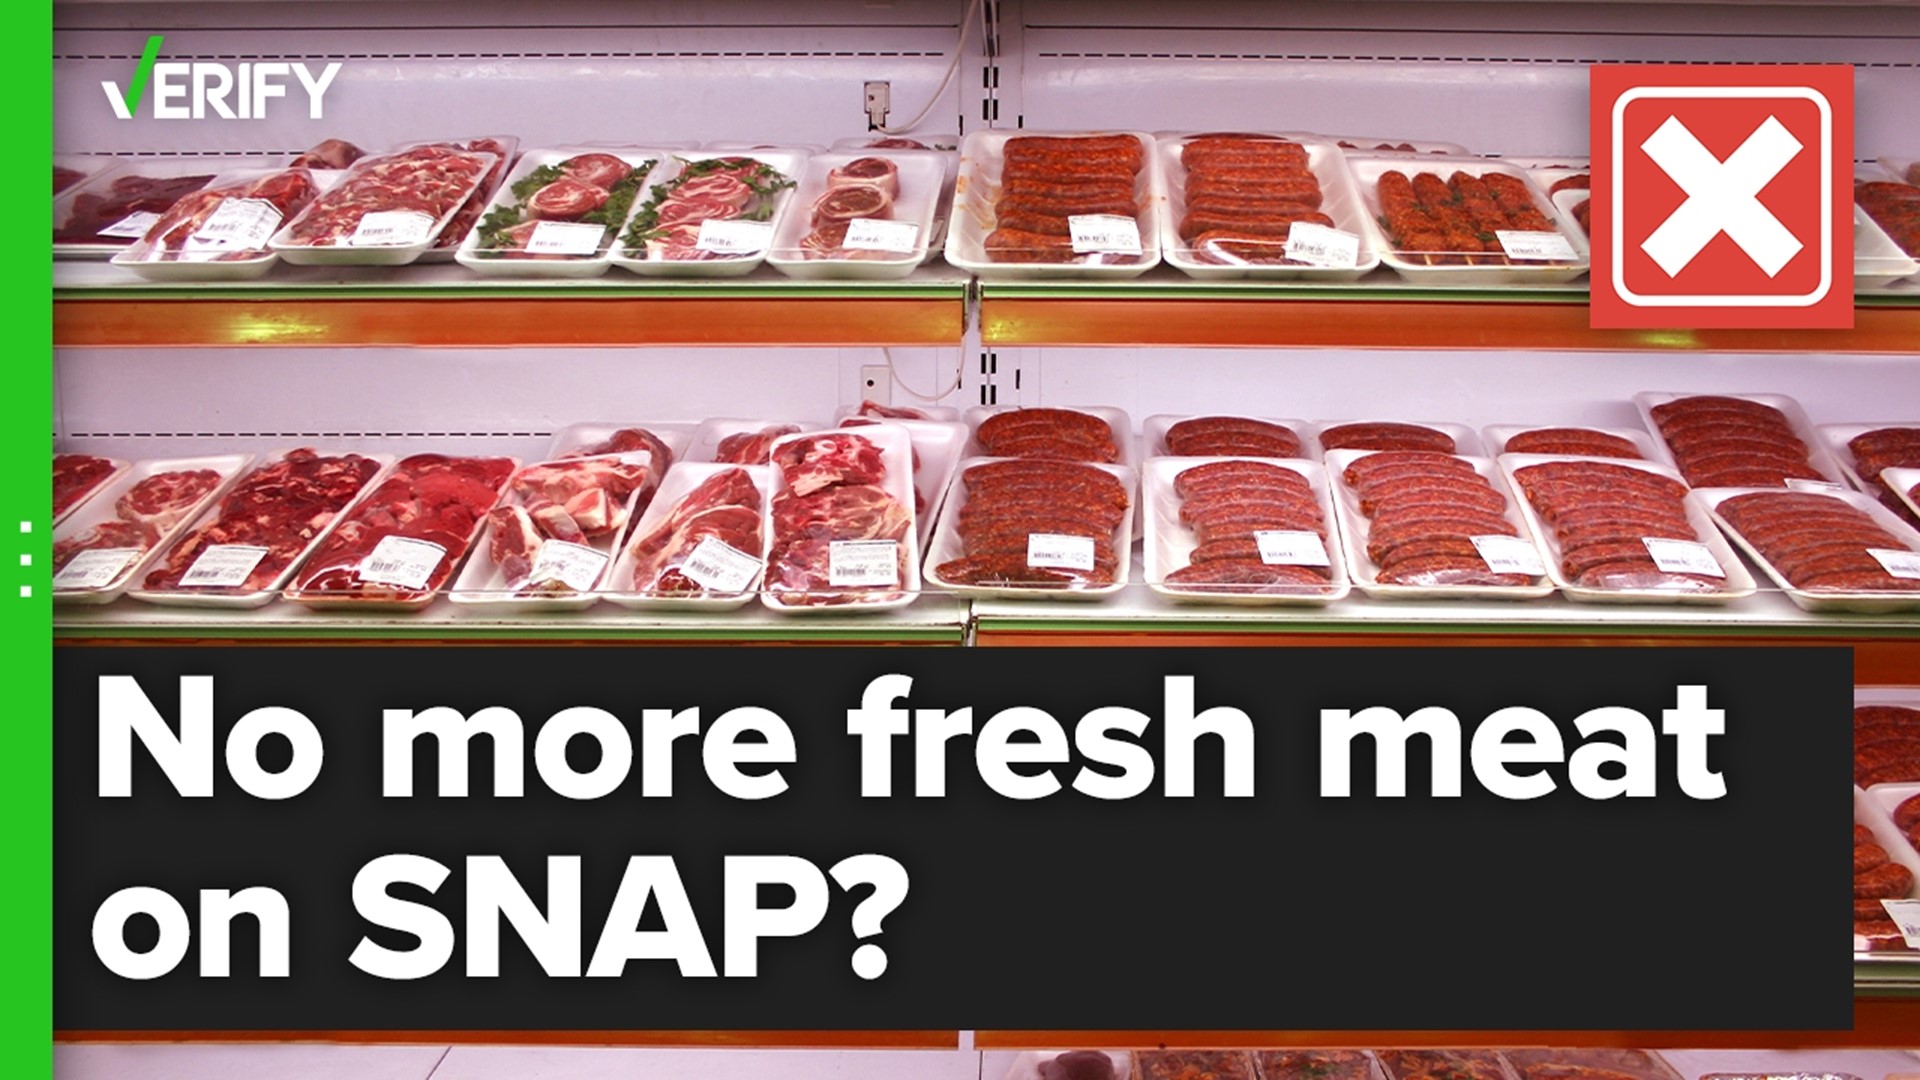 Iowa Republicans introduced a bill that would make staples like fresh meat ineligible for SNAP benefits. But the proposal would not affect other states.